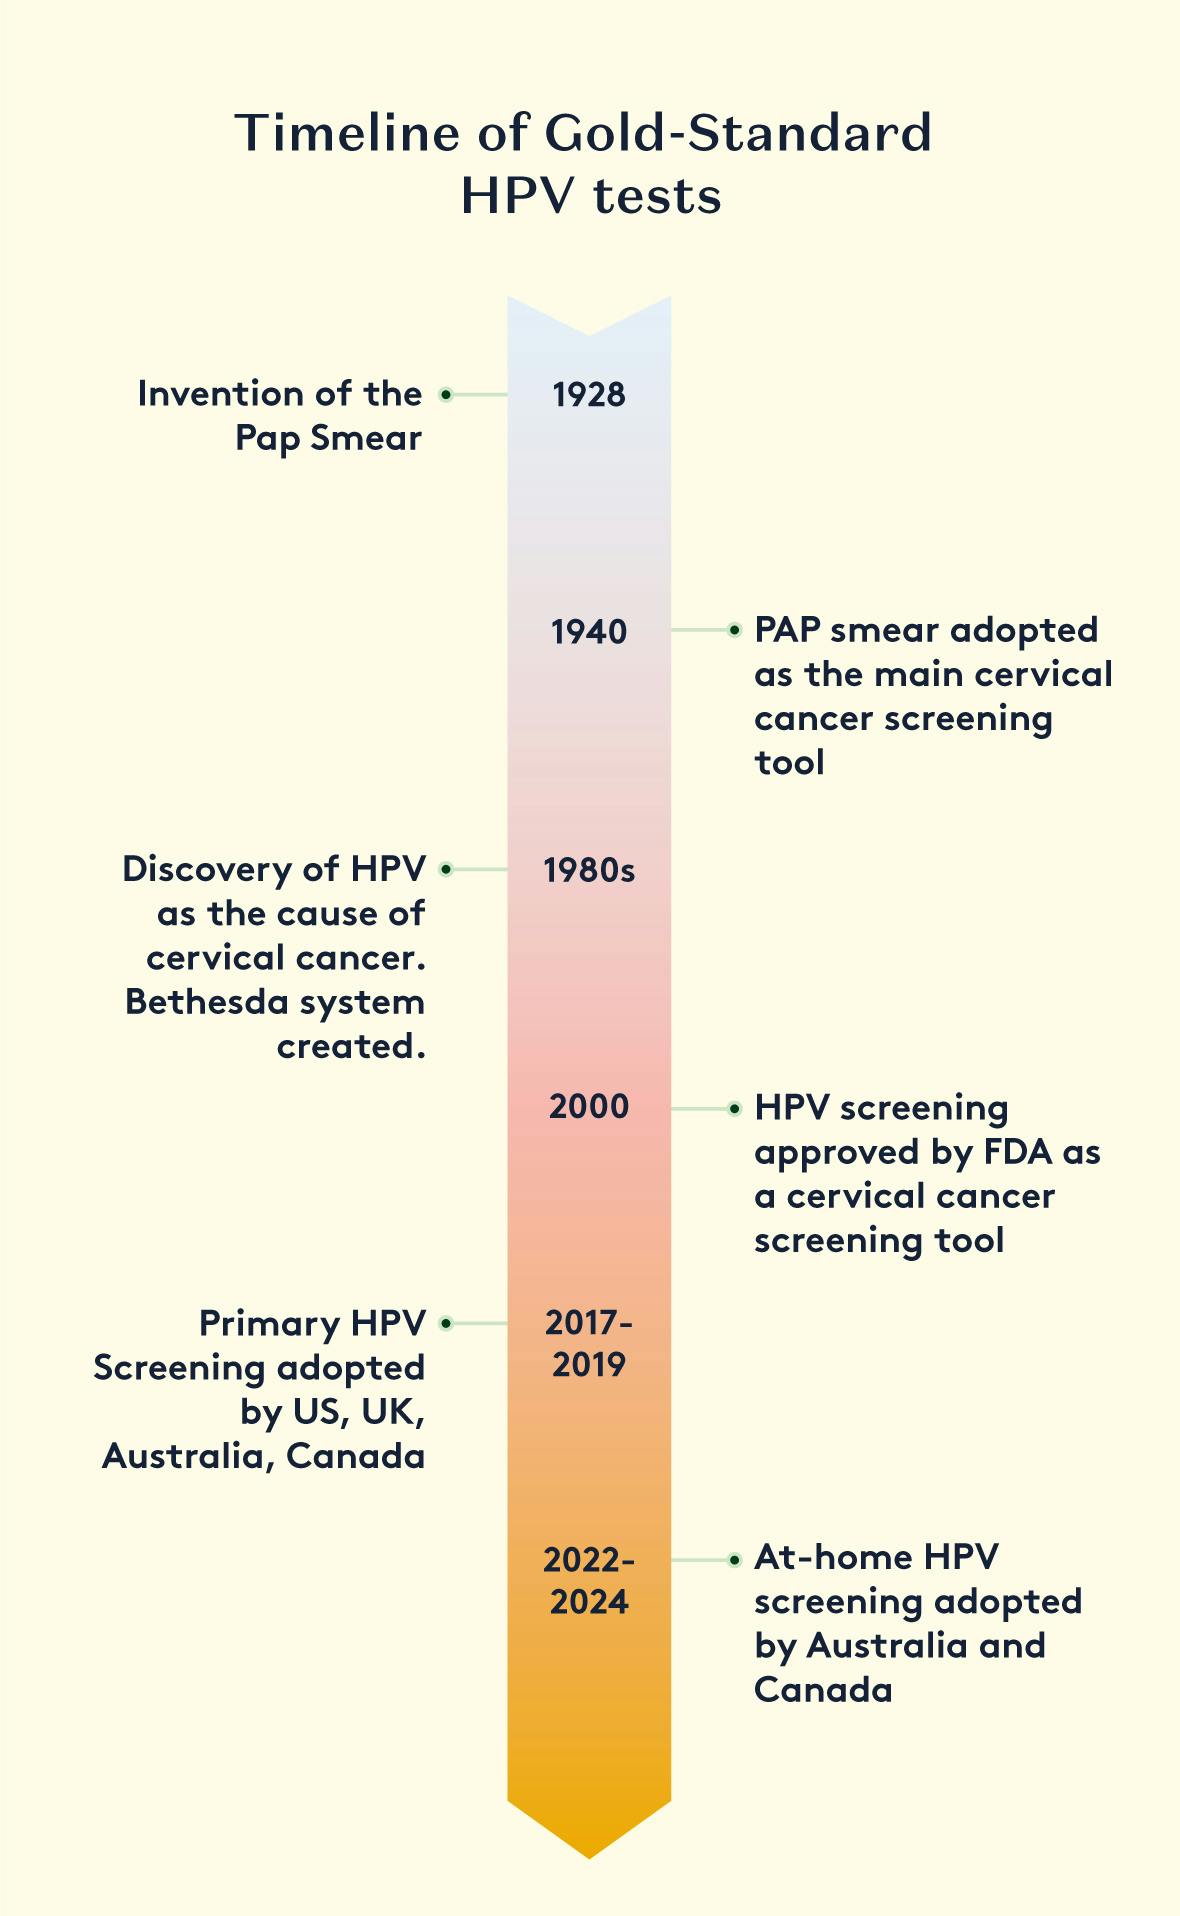 History of HPV testing